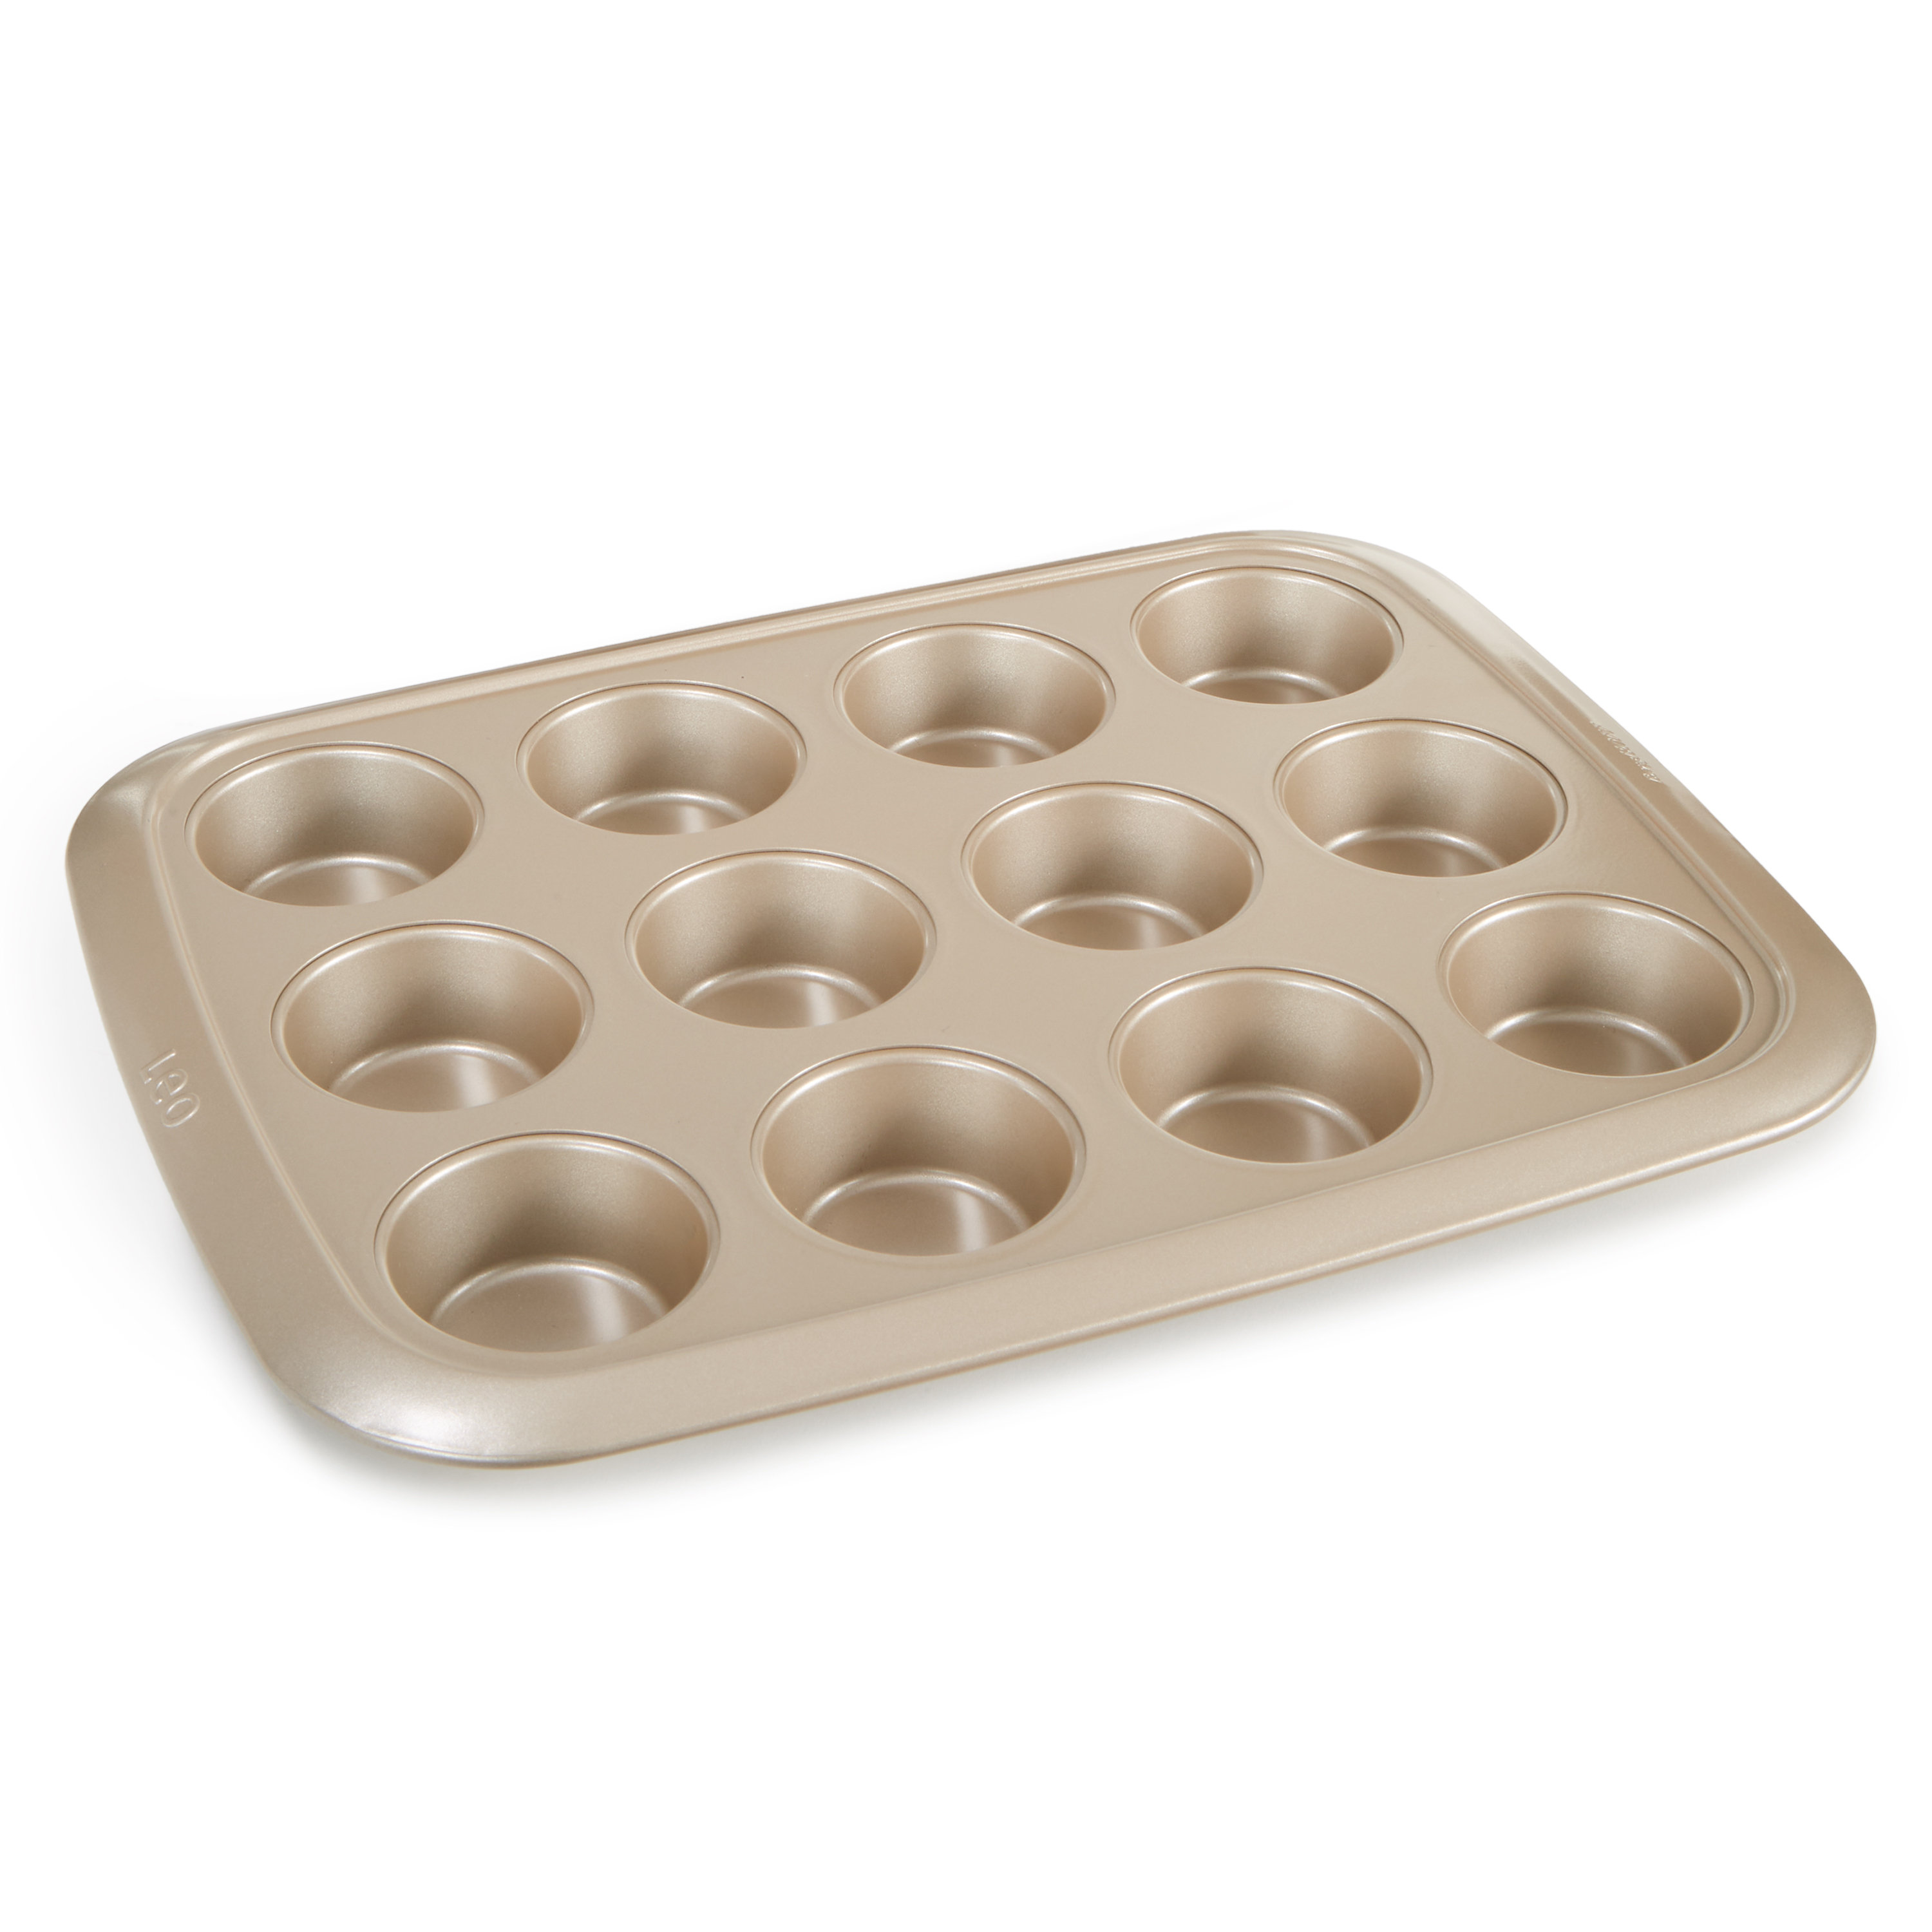 NEW Made By Design Non-Stick Muffin Tin - 12 Cup - Carbon Steel pan